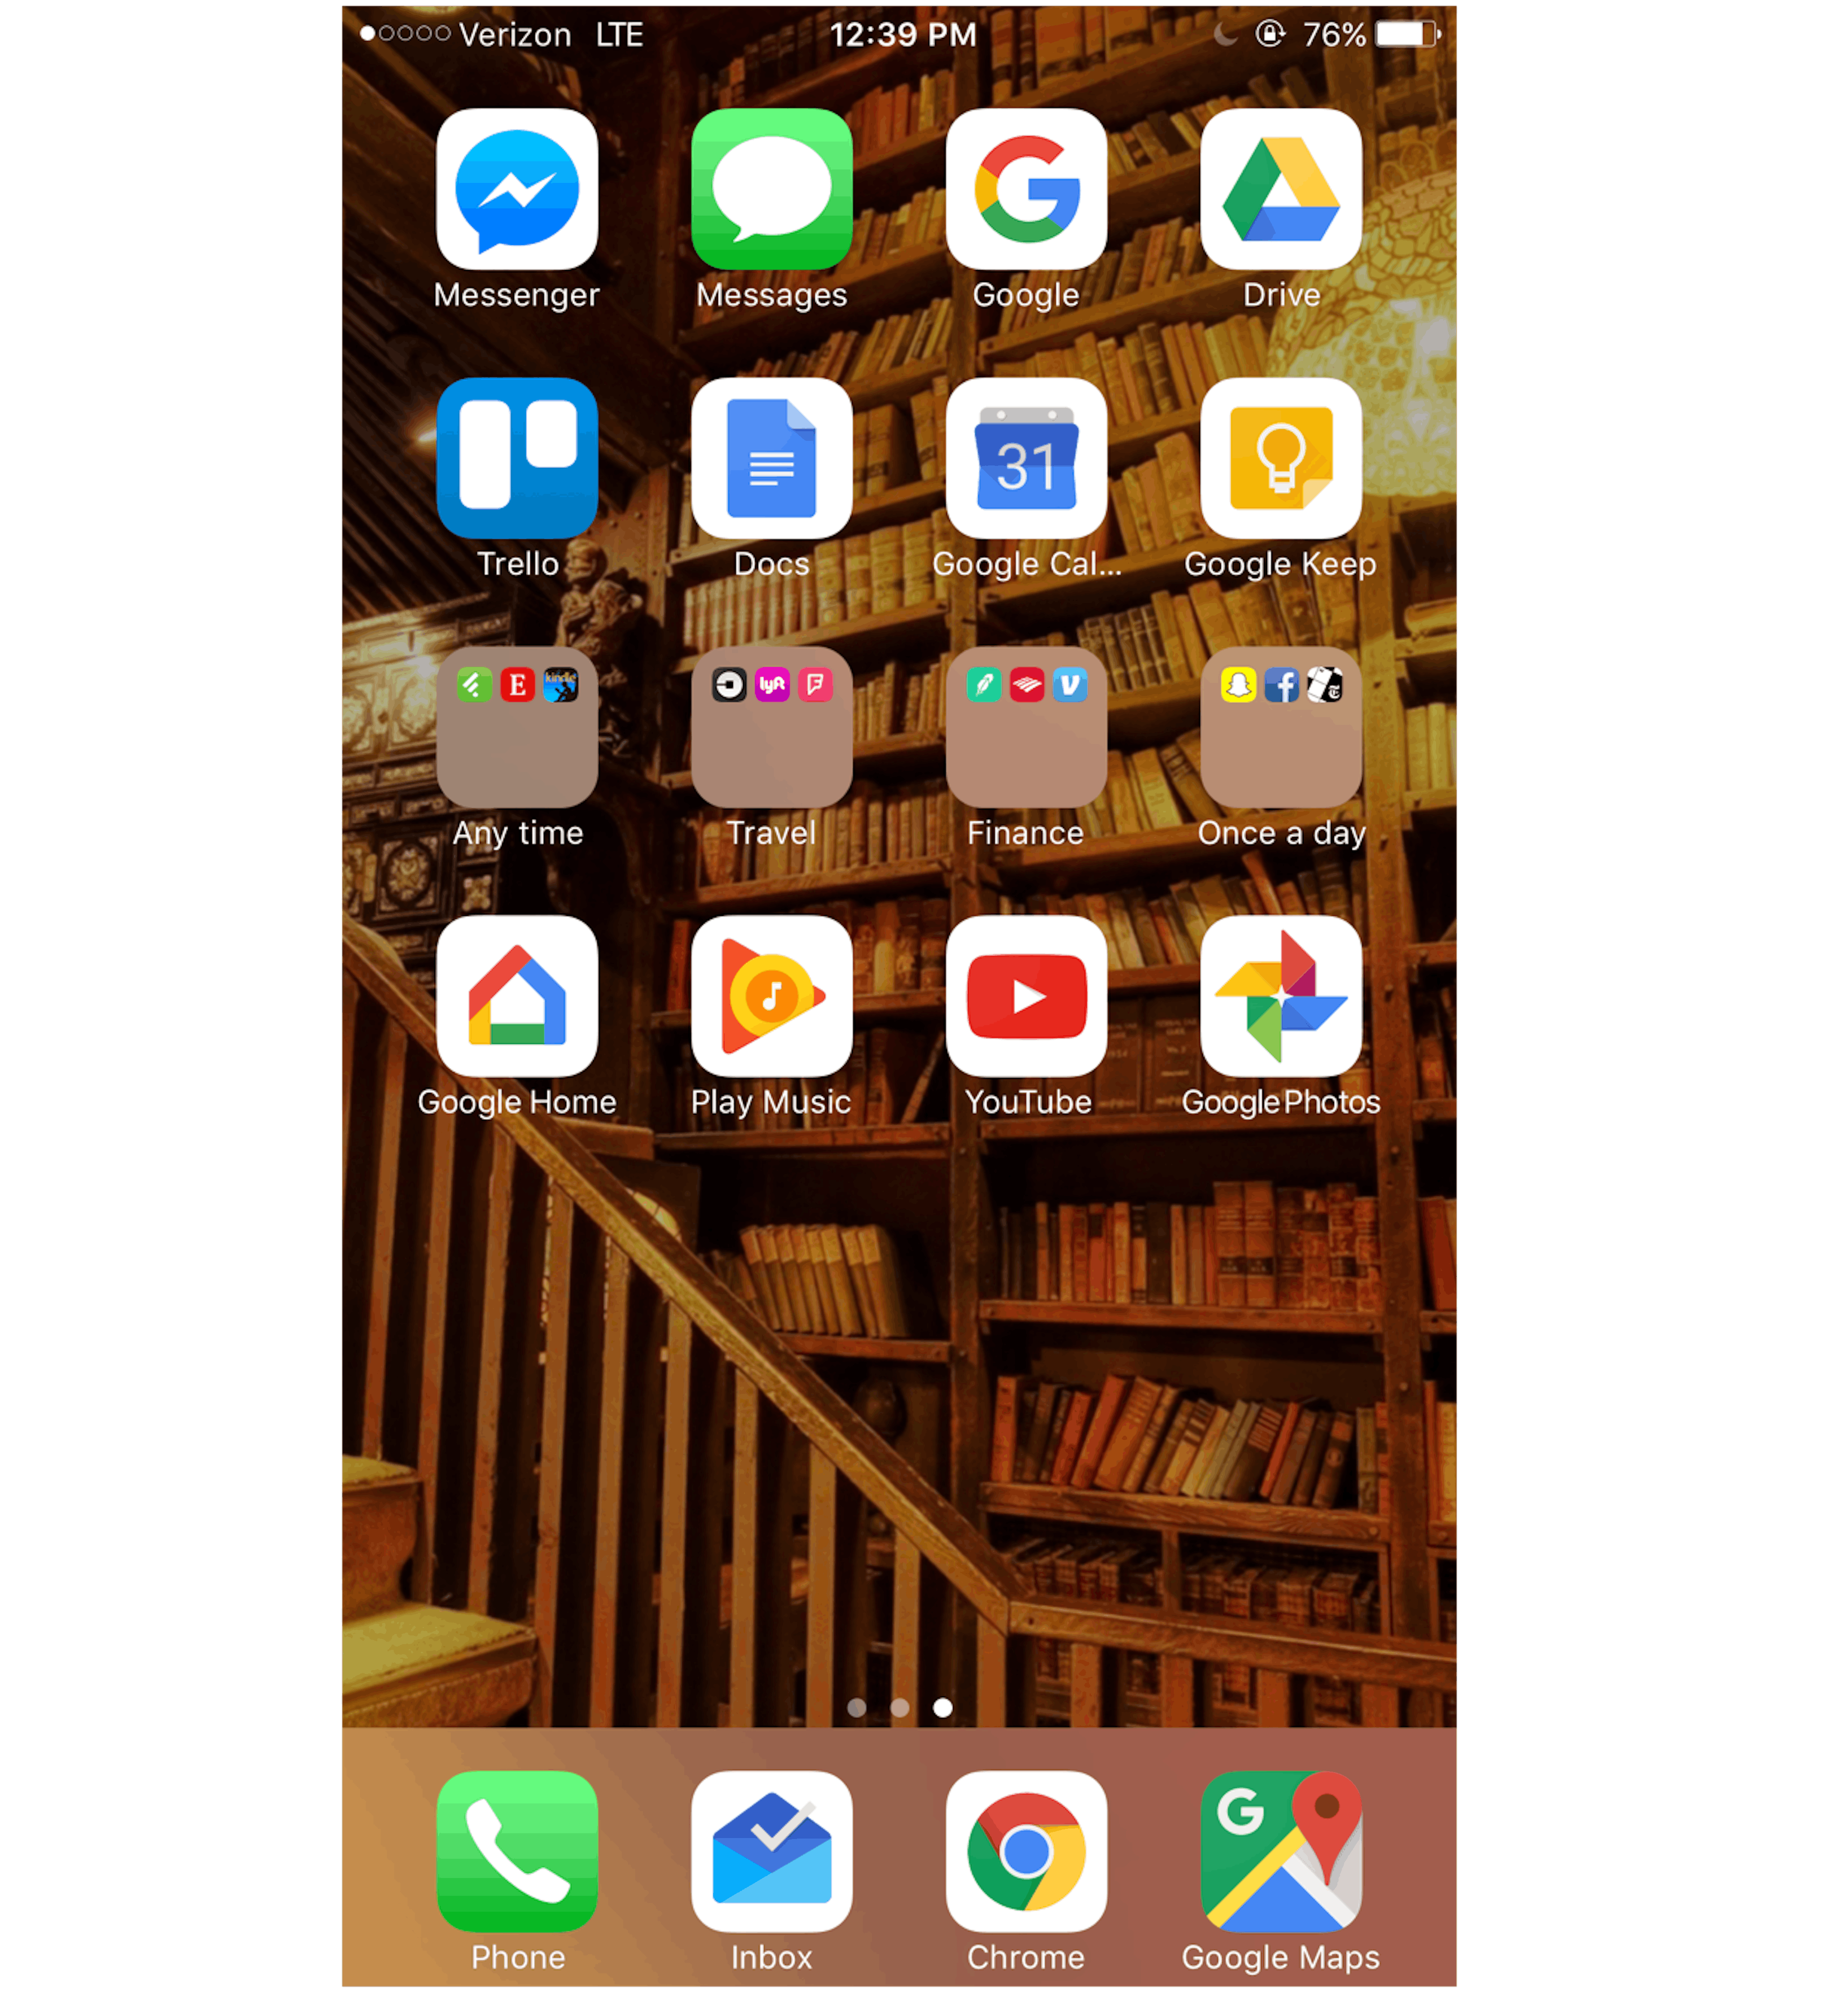 featured image - How I live: My iPhone home screen